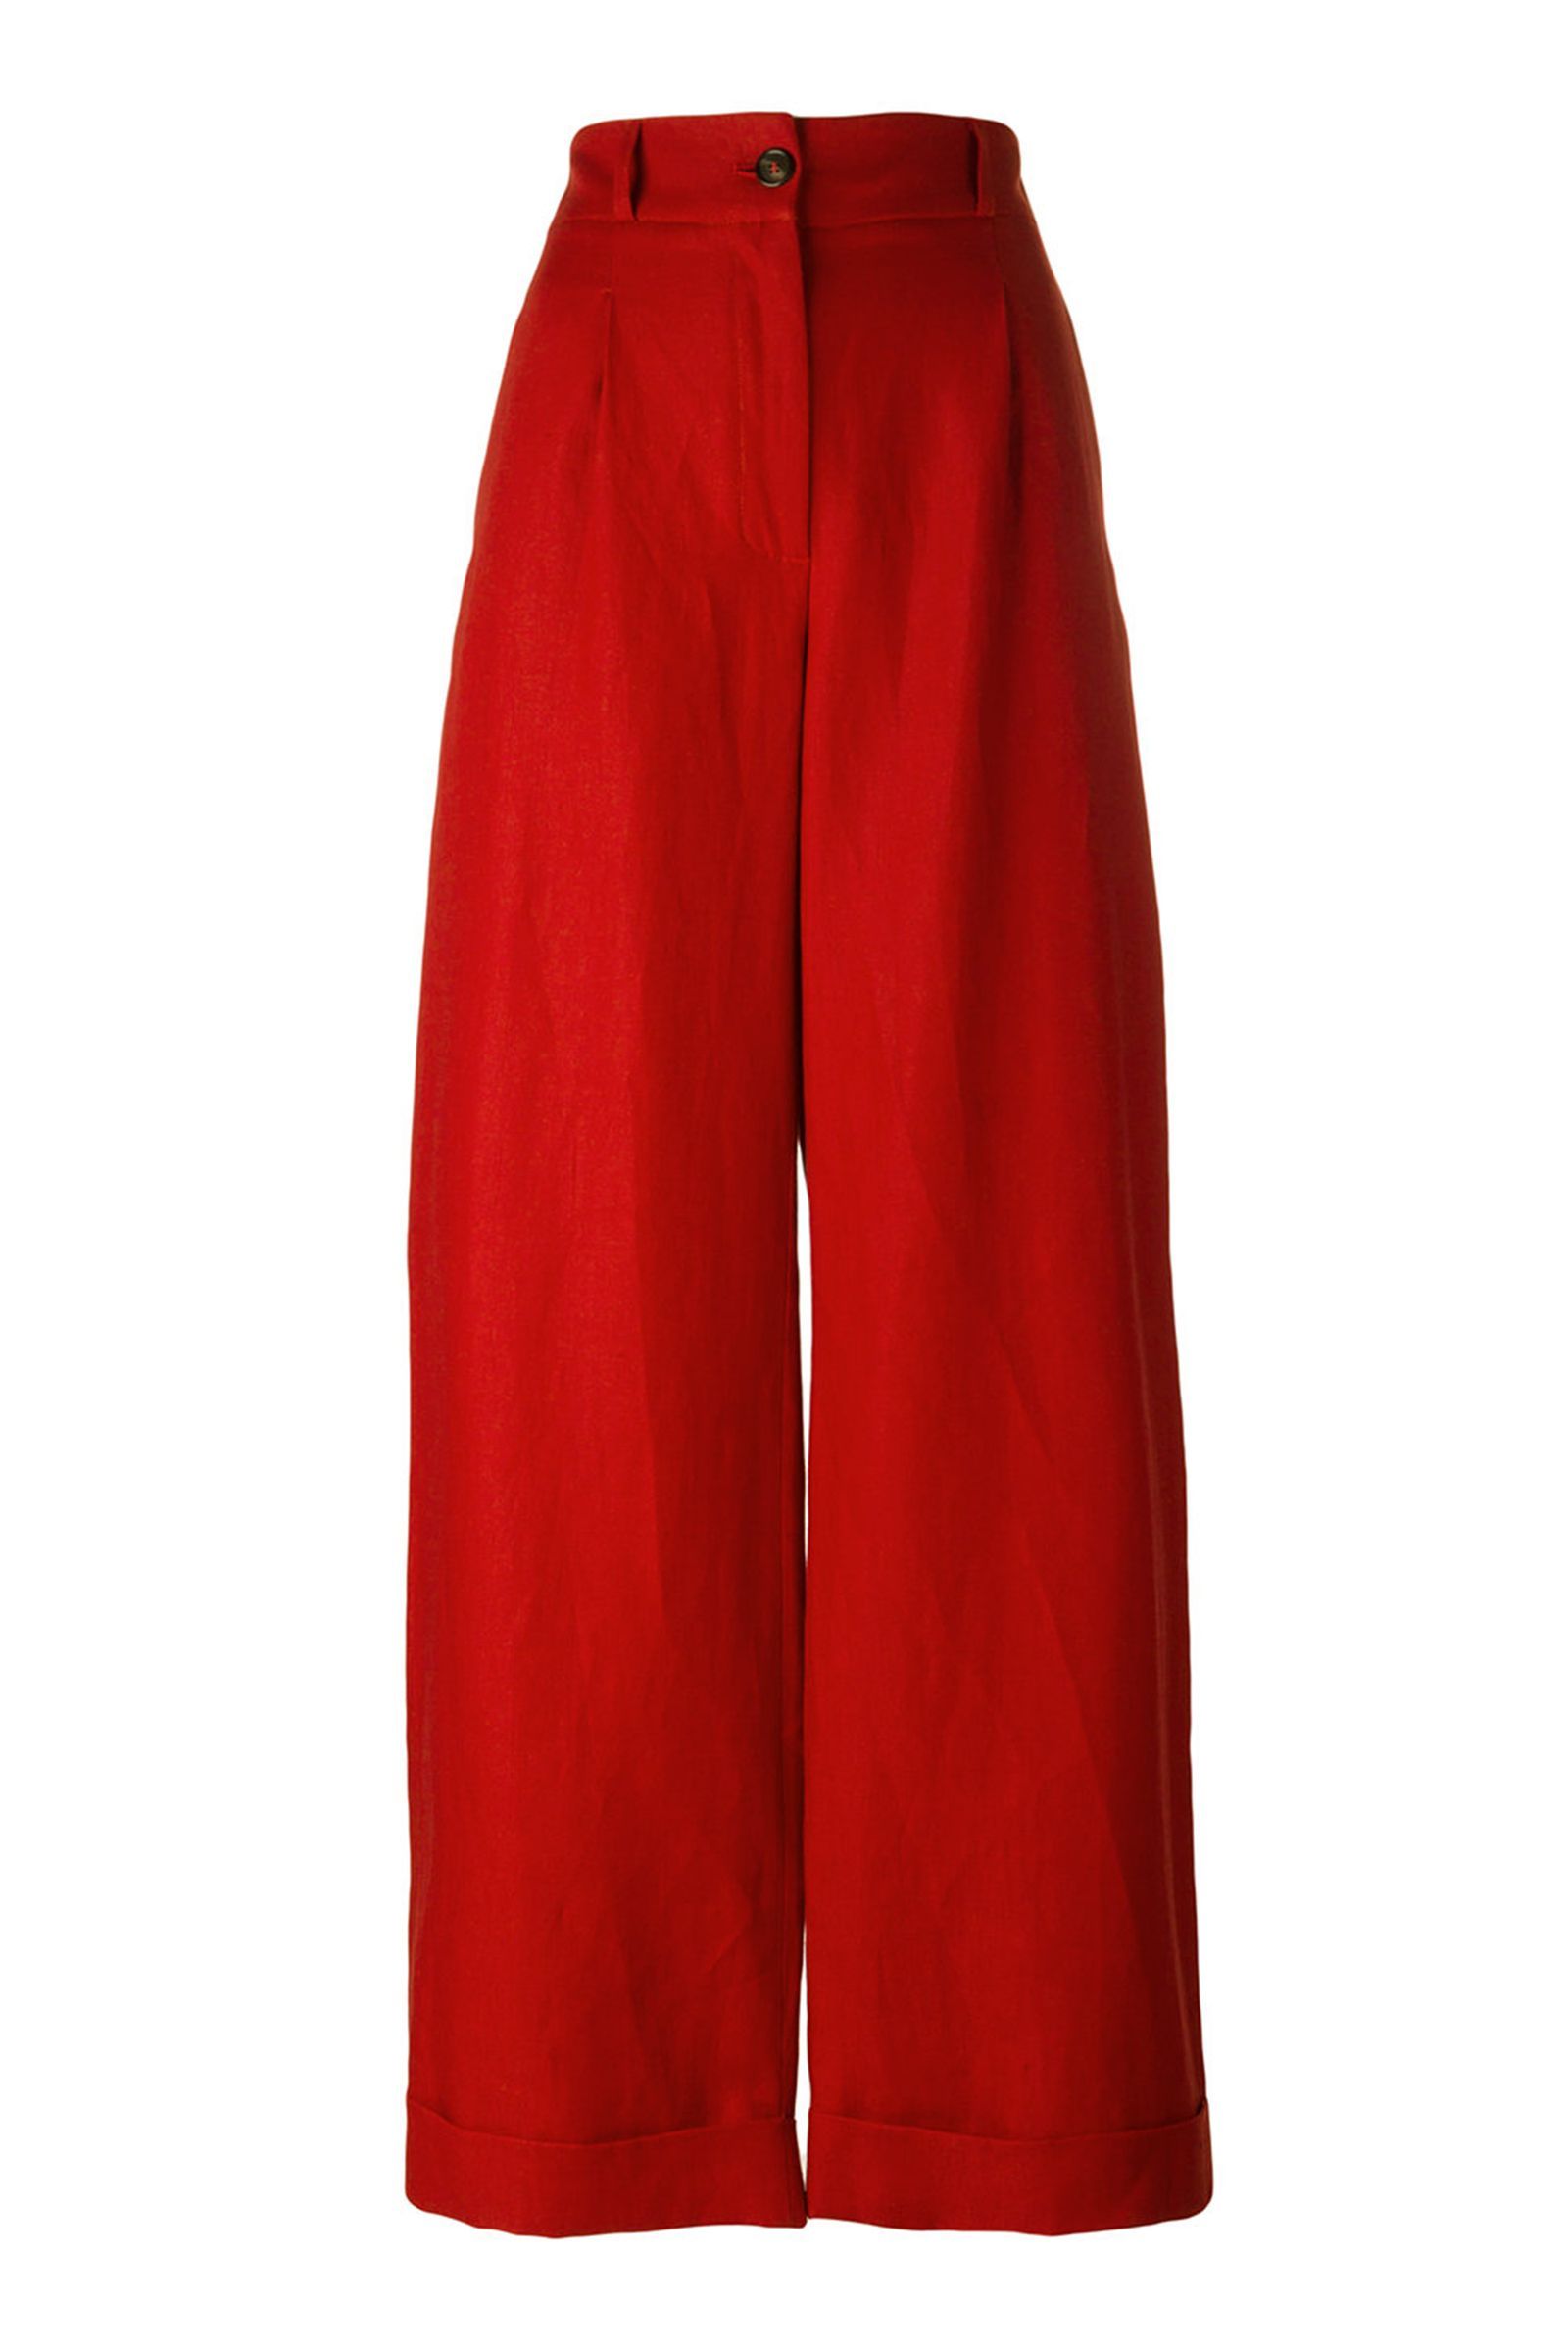 Bold and Confident: Rocking Red Trousers with Style